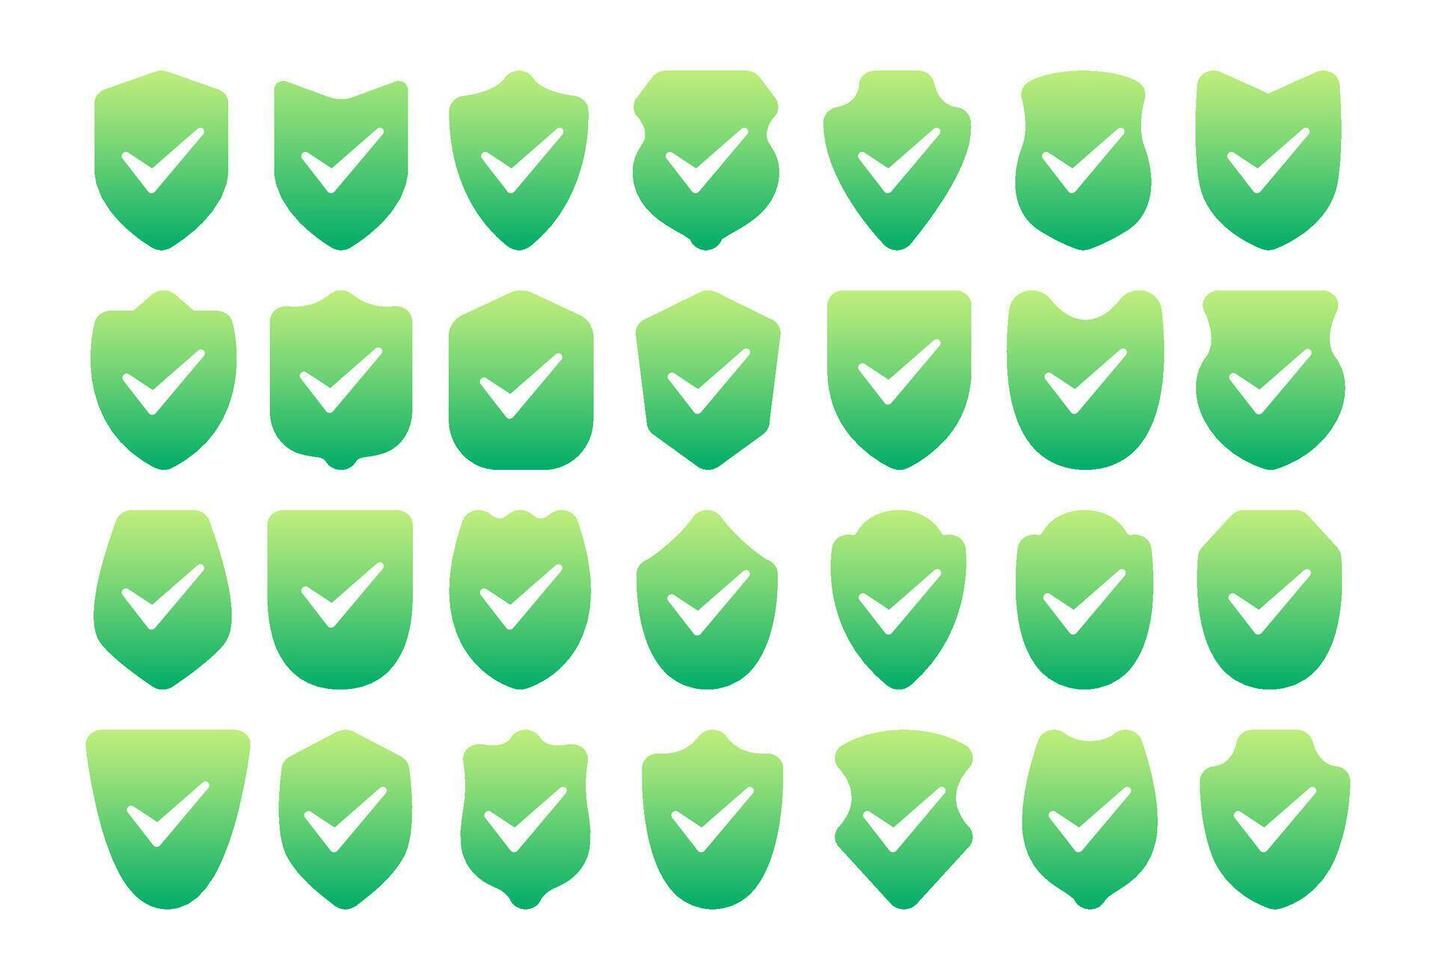 Collection of green shield shapes with checkmarks, representing safety, security, and verification vector